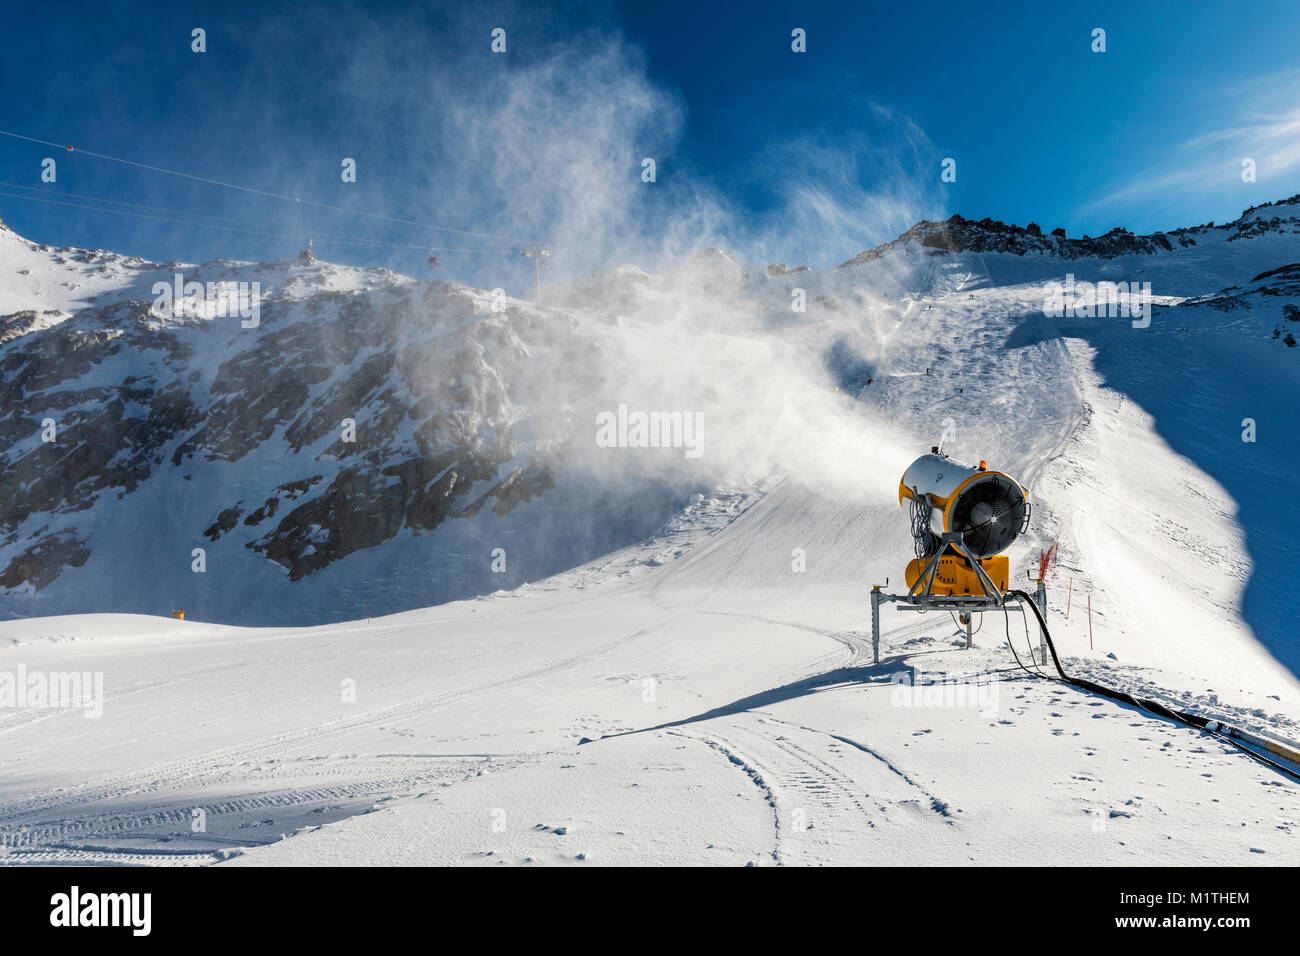 https://c8.alamy.com/comp/M1THEM/snowmaking-snow-cannon-working-on-the-slope-M1THEM.jpg